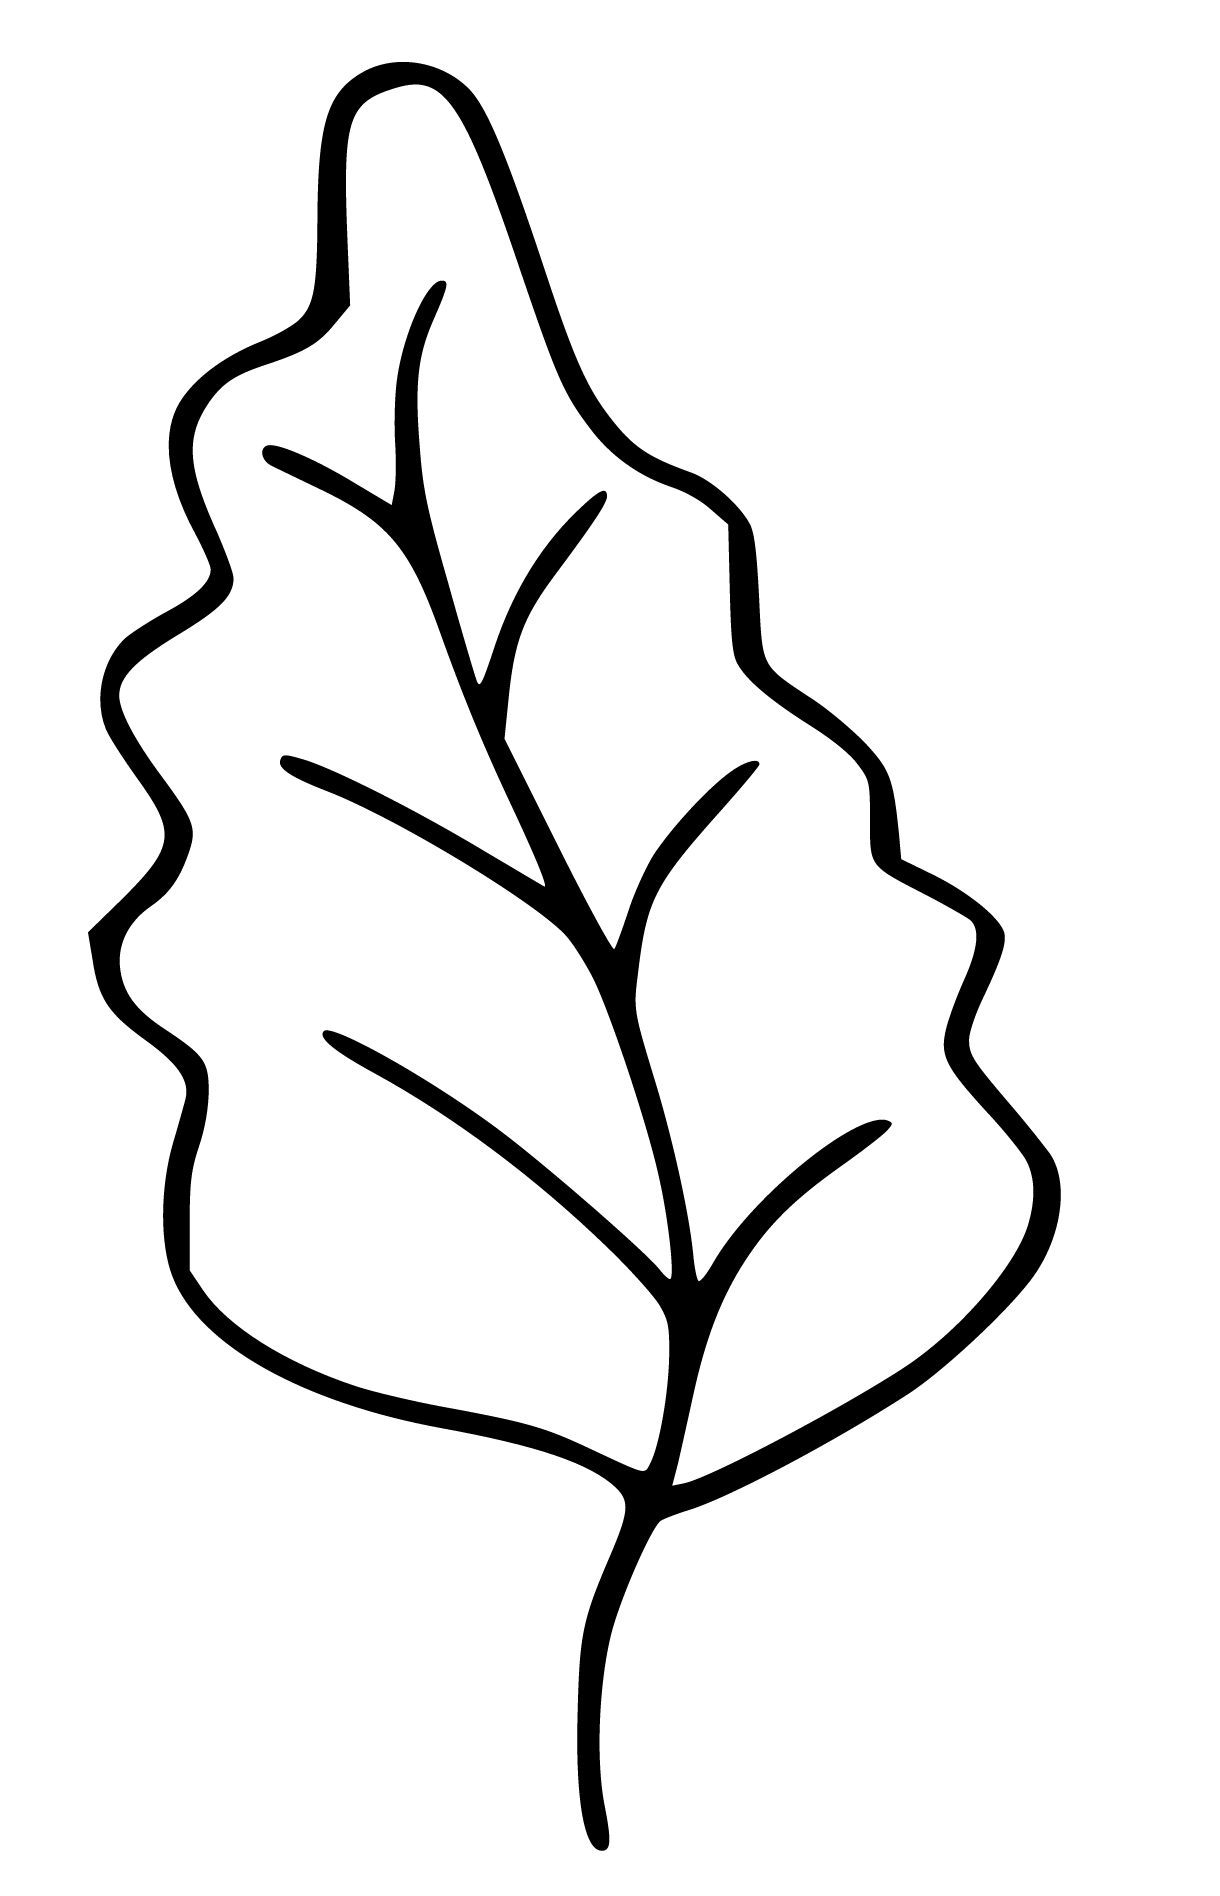 Leaf Outline Coloring Page Printable for Kids, Free, Simple and Easy, as PDF